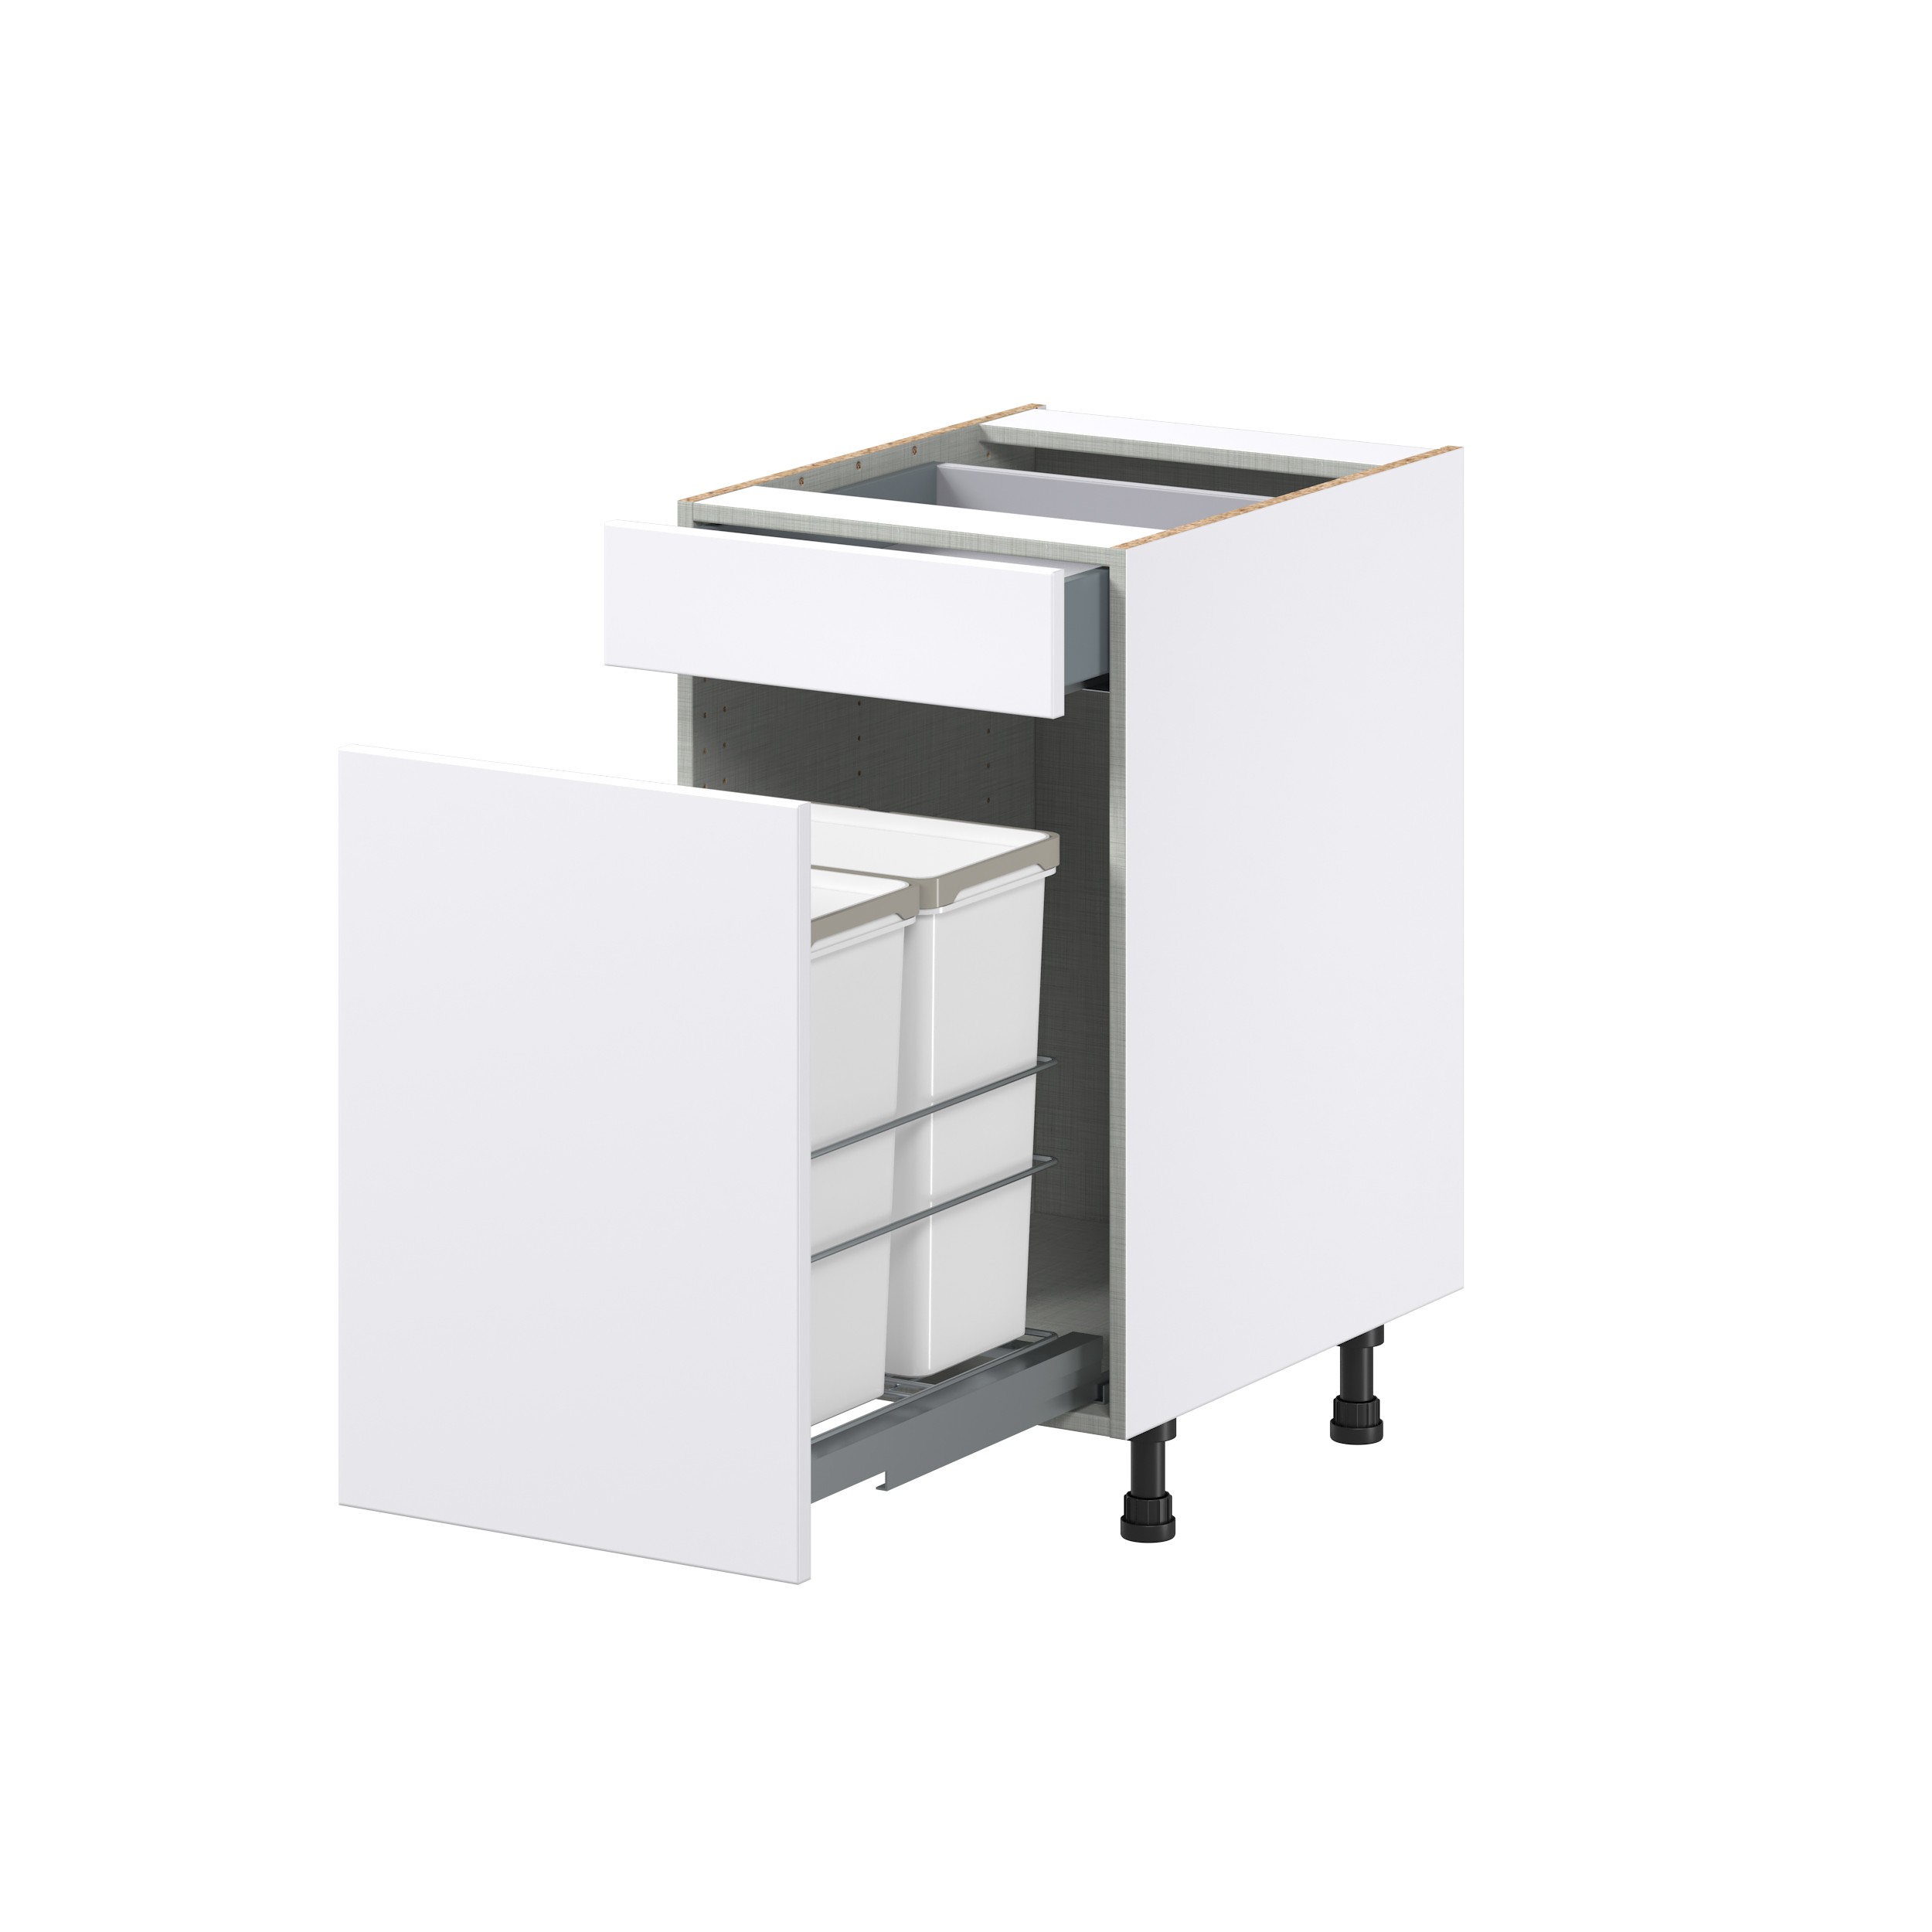 Lily Bright White Slab Assembled with 1 Drawer and 2 Pull Out Waste Bin Kitchen Cabinet (18 in. W x 34.5 in. H x 24 in. D)